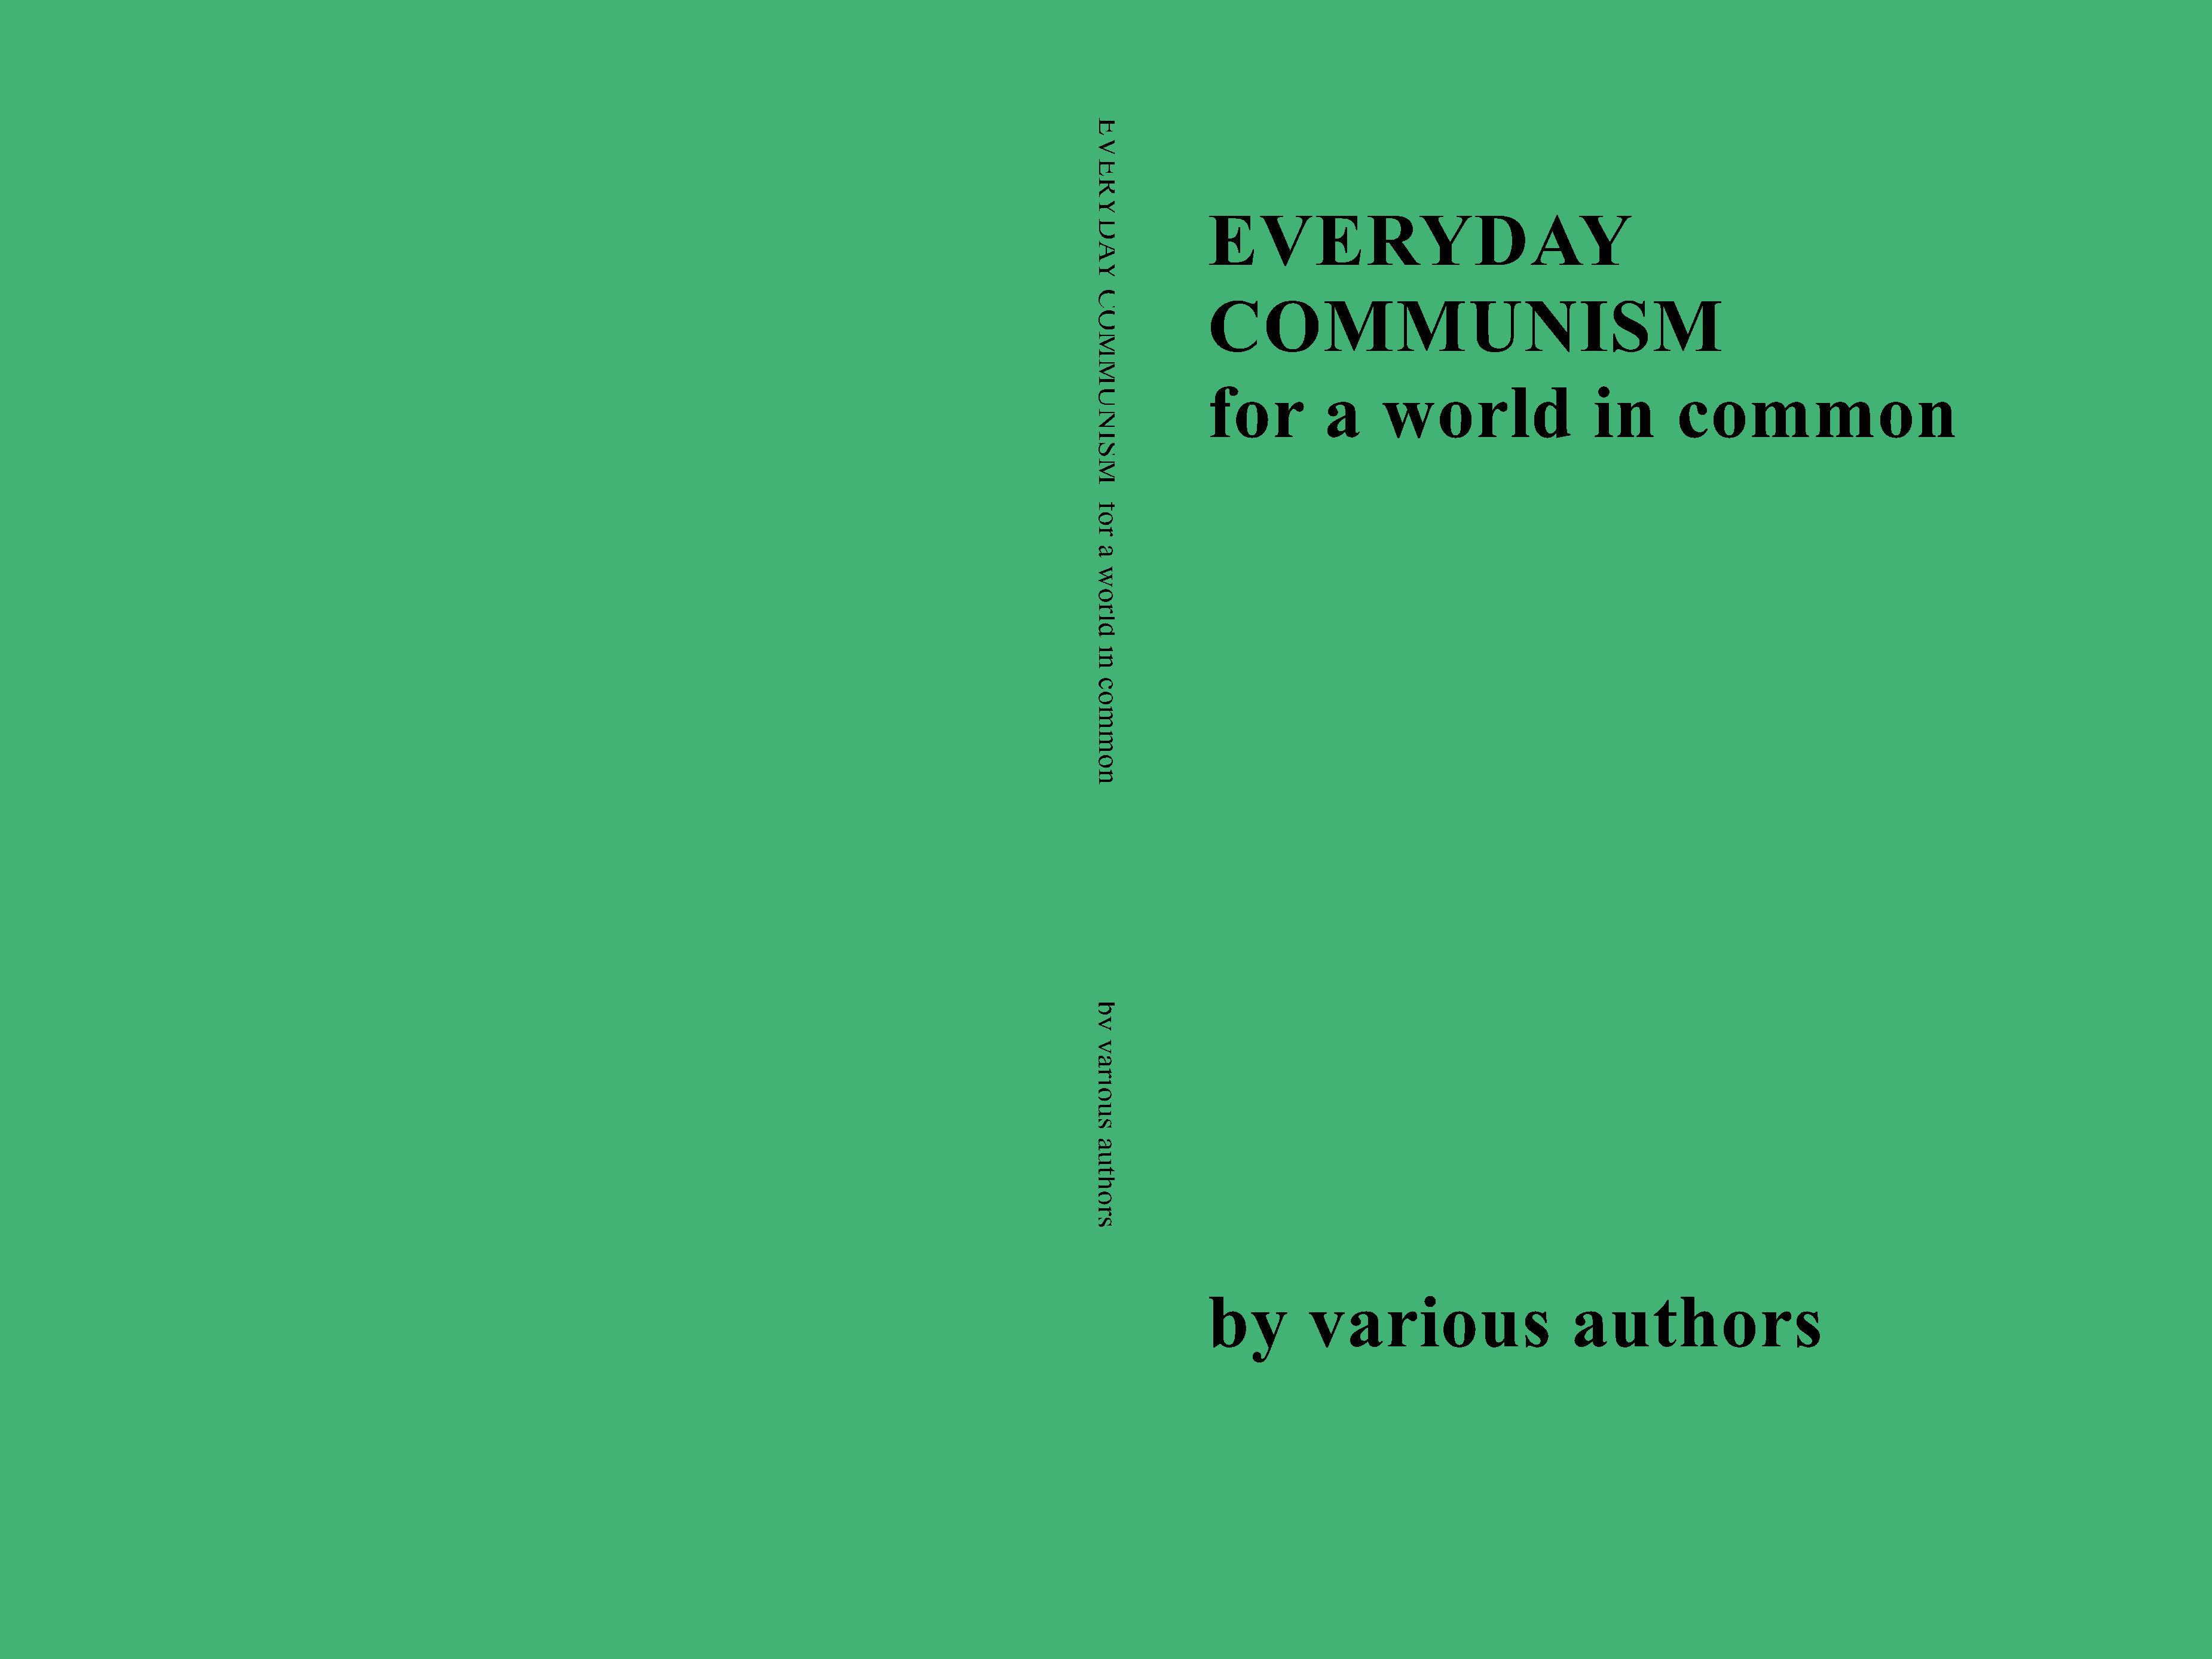 EVERYDAY COMMUNISM  for a world in common cover image